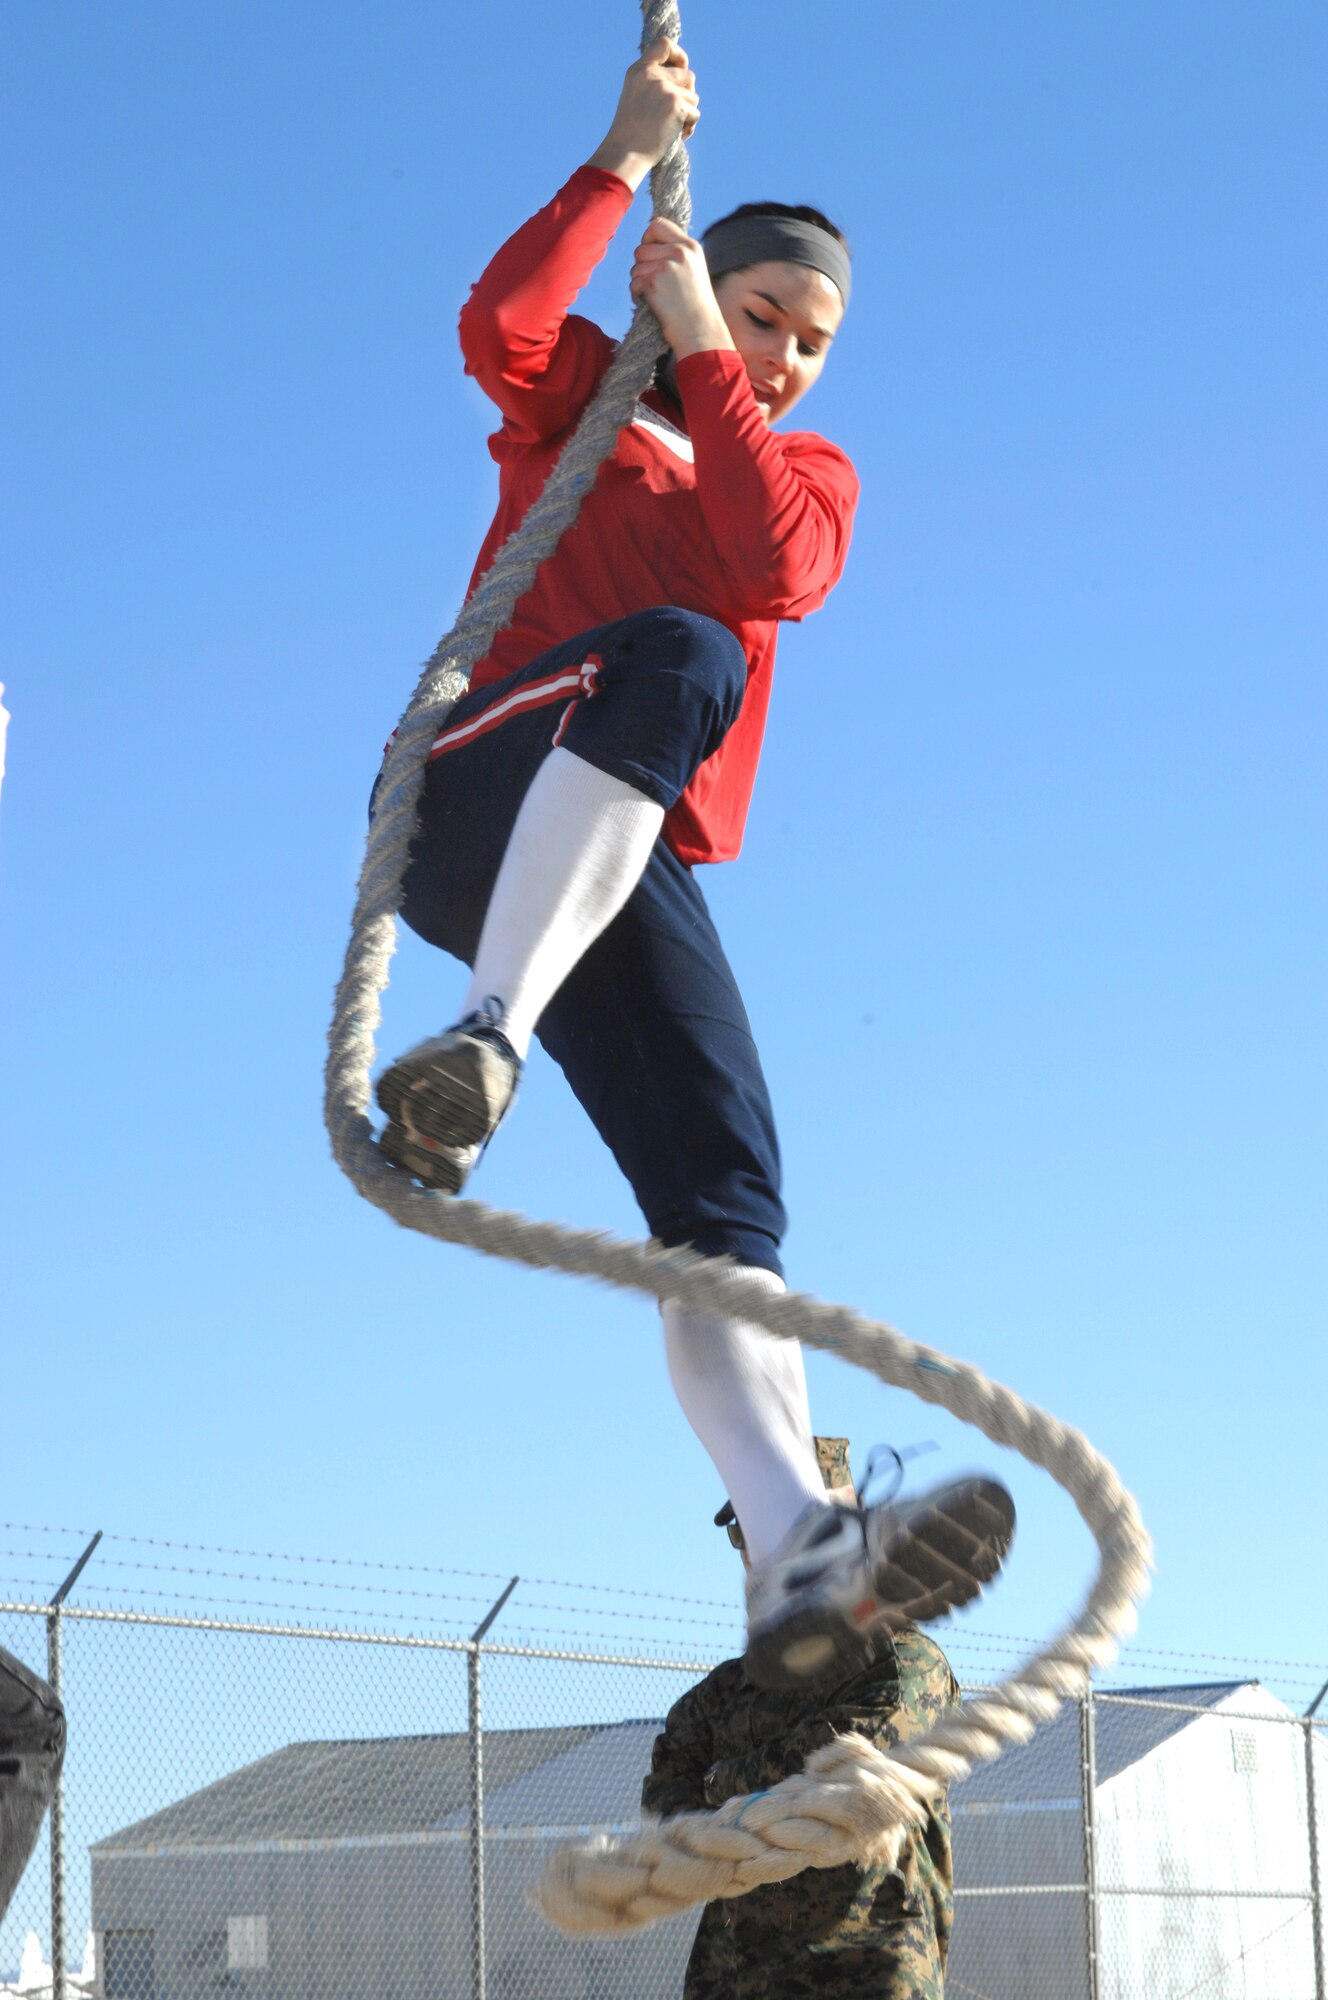 University of Arizona Student Samantha Lee Davis, women’s softball team third baseman, attempts to climb a rope while at an obstacle course on Davis-Monthan Air Force Base, Ariz., Jan. 13, 2012. The rope climb is the final obstacle on the course. (U.S. Air Force photo by Airman 1st Class Josh Slavin/Released)